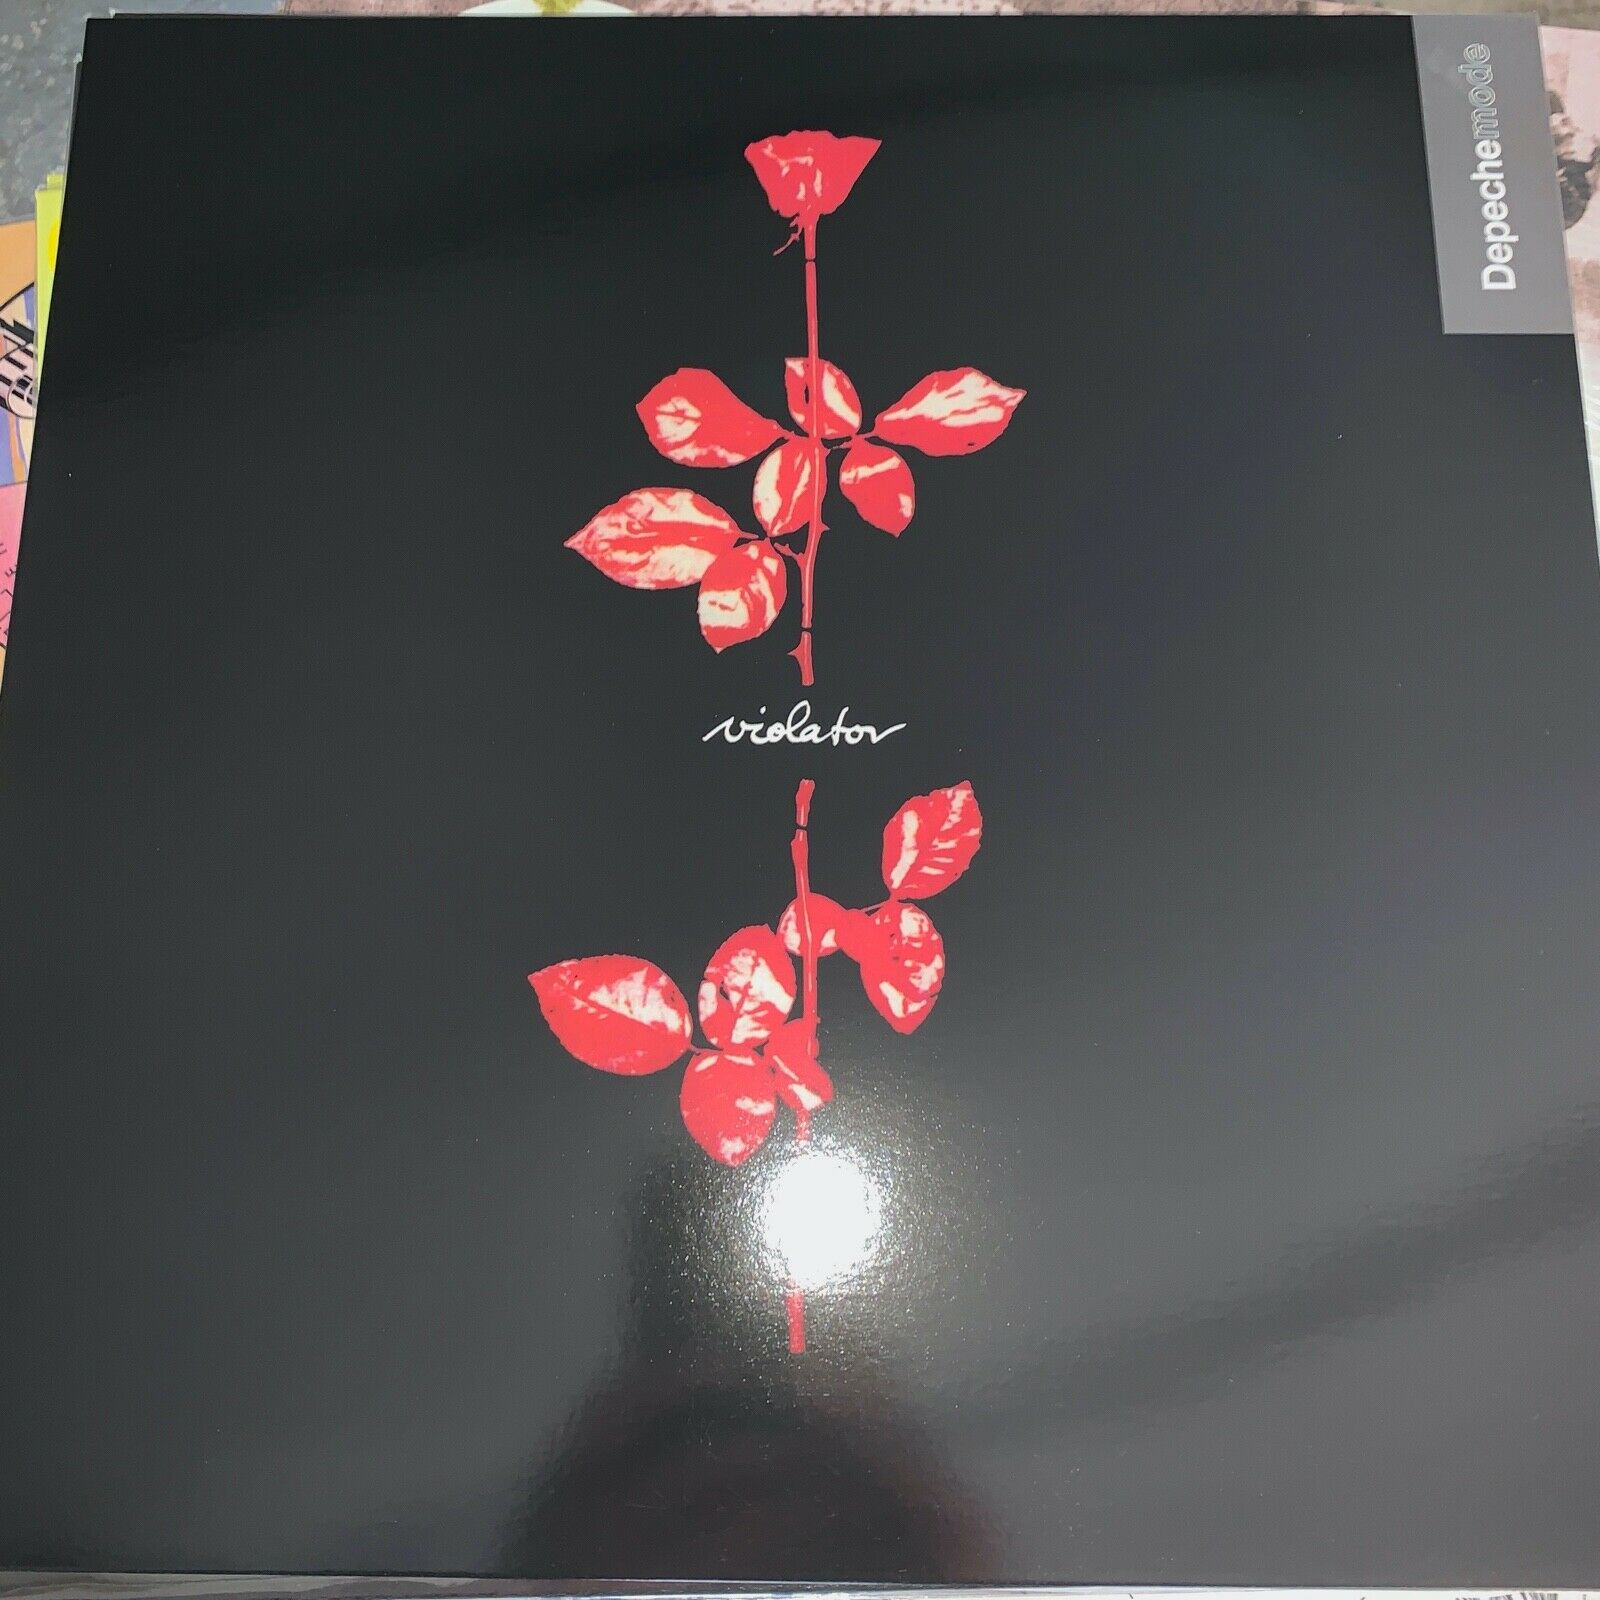 Gripsweat - DEPECHE MODE, VIOLATOR, HOT PINK COLORED VINYL LP, W/POSTER,  LIMITED EDITION